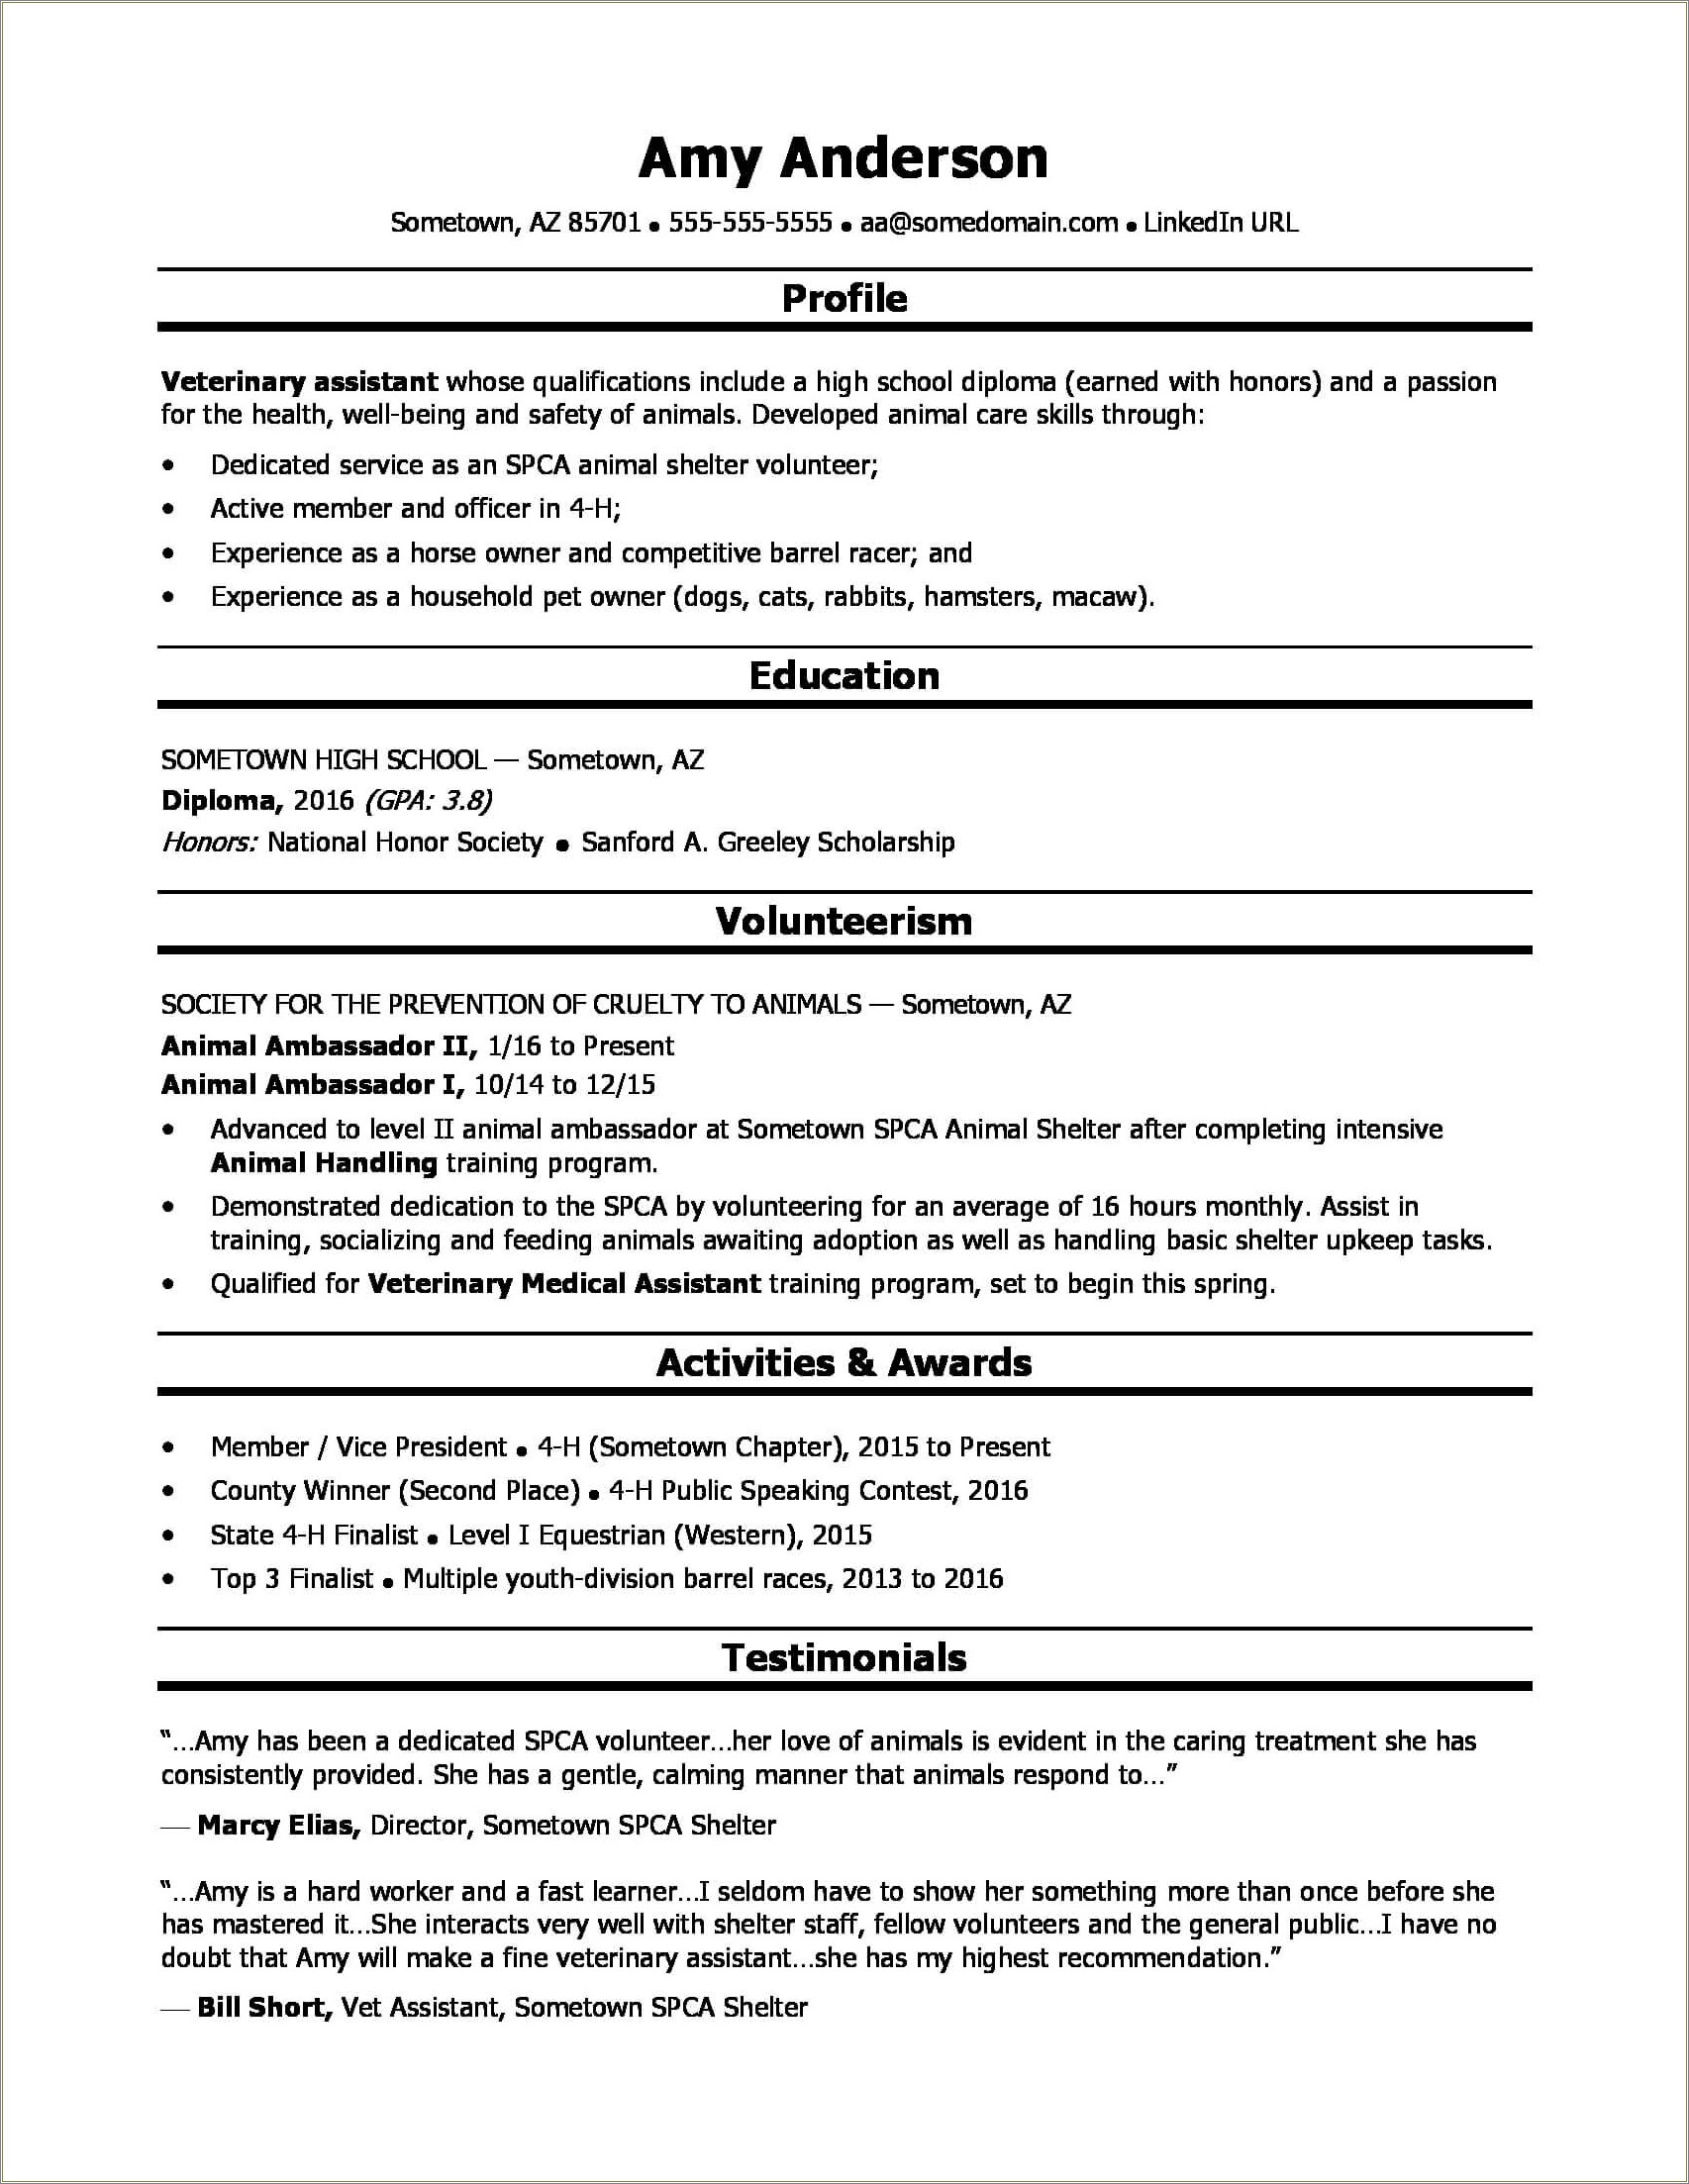 Resume Examples Skills For High School Students